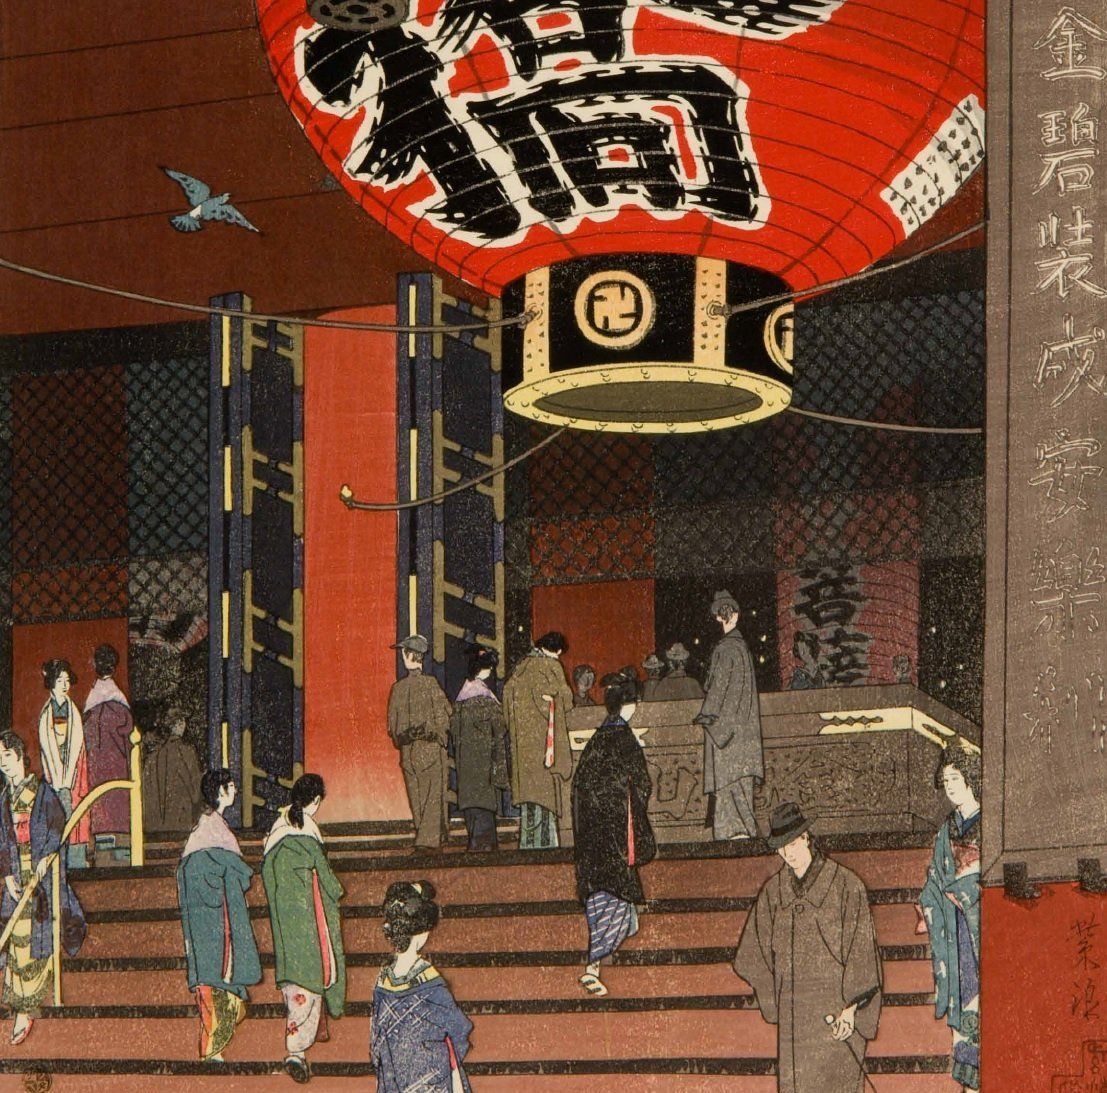  Japan Journeys: Famous Woodblock Prints of Cultural Sights in Japan 